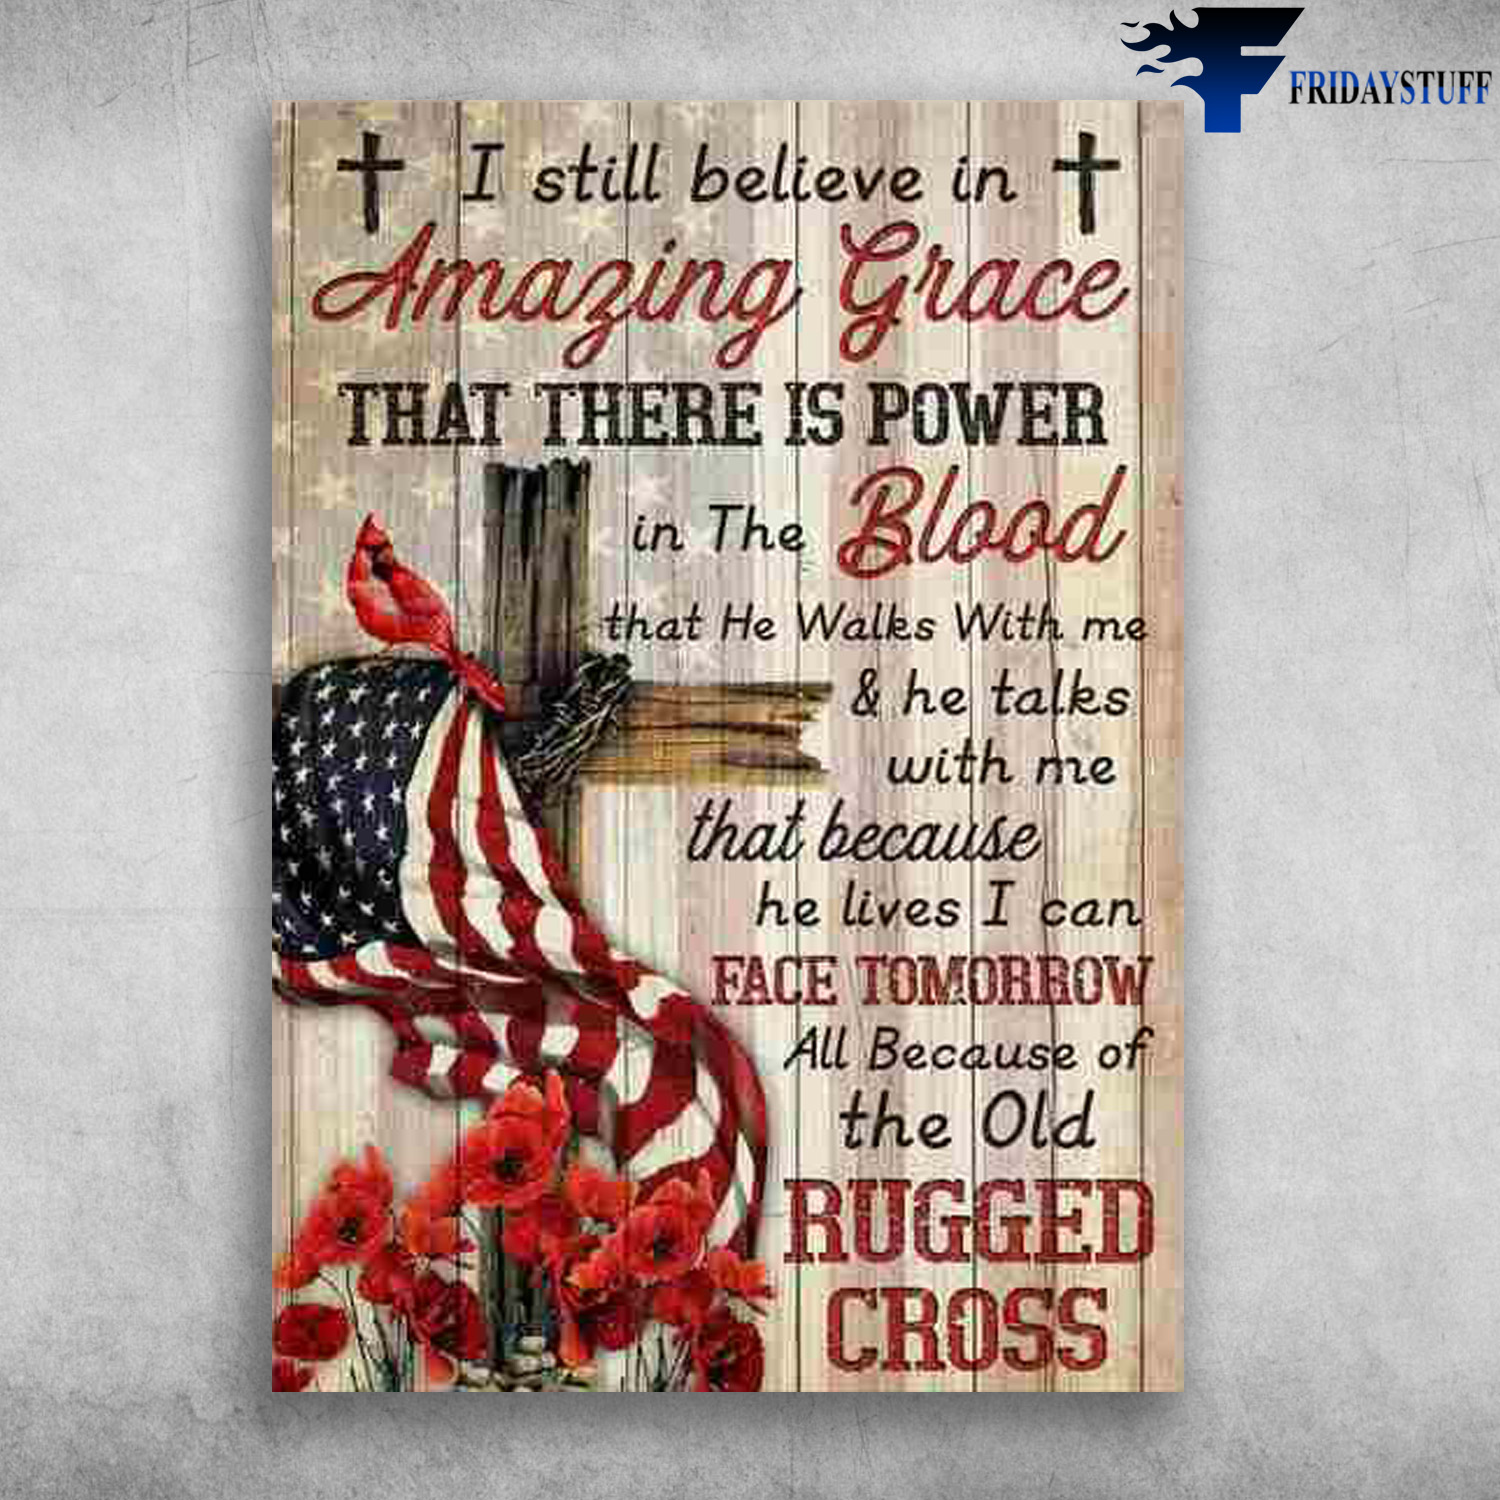 Cardinal Birl Flower, American Cross - I Still Believe In Amazing Grace, That There Is Power In The Blood, That He Walks With Me, And He Talks With Me, That Because He Lives, I Can Fact Tomorrow, All Because Of The Old Rugged Cross